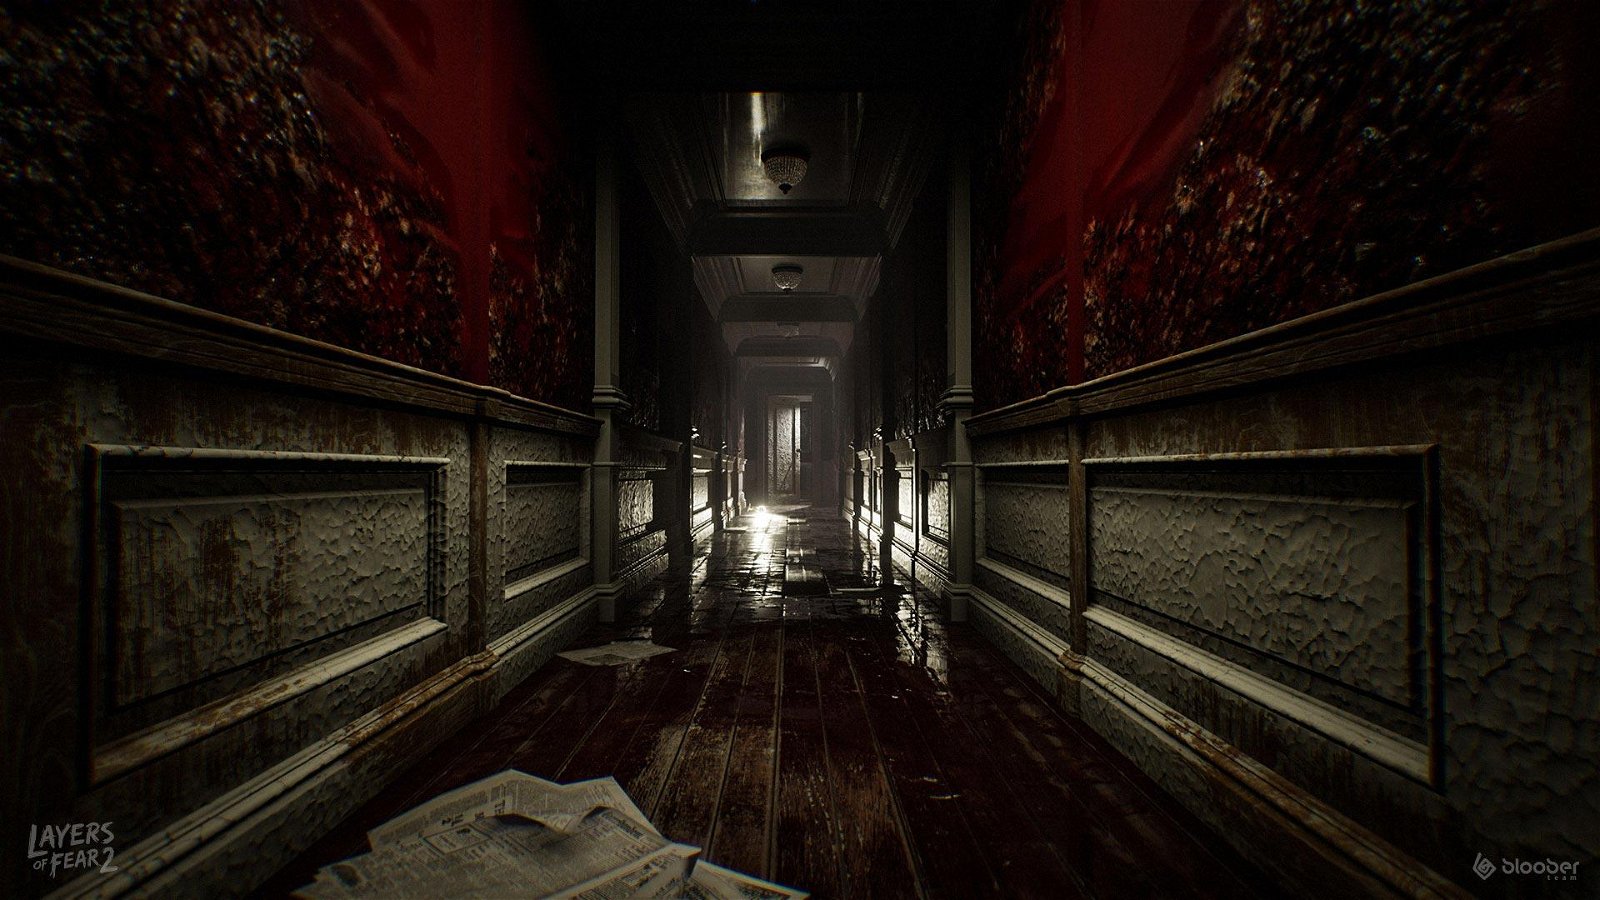 Layers Of Fear 2 torna a mostrarsi in un nuovo video gameplay